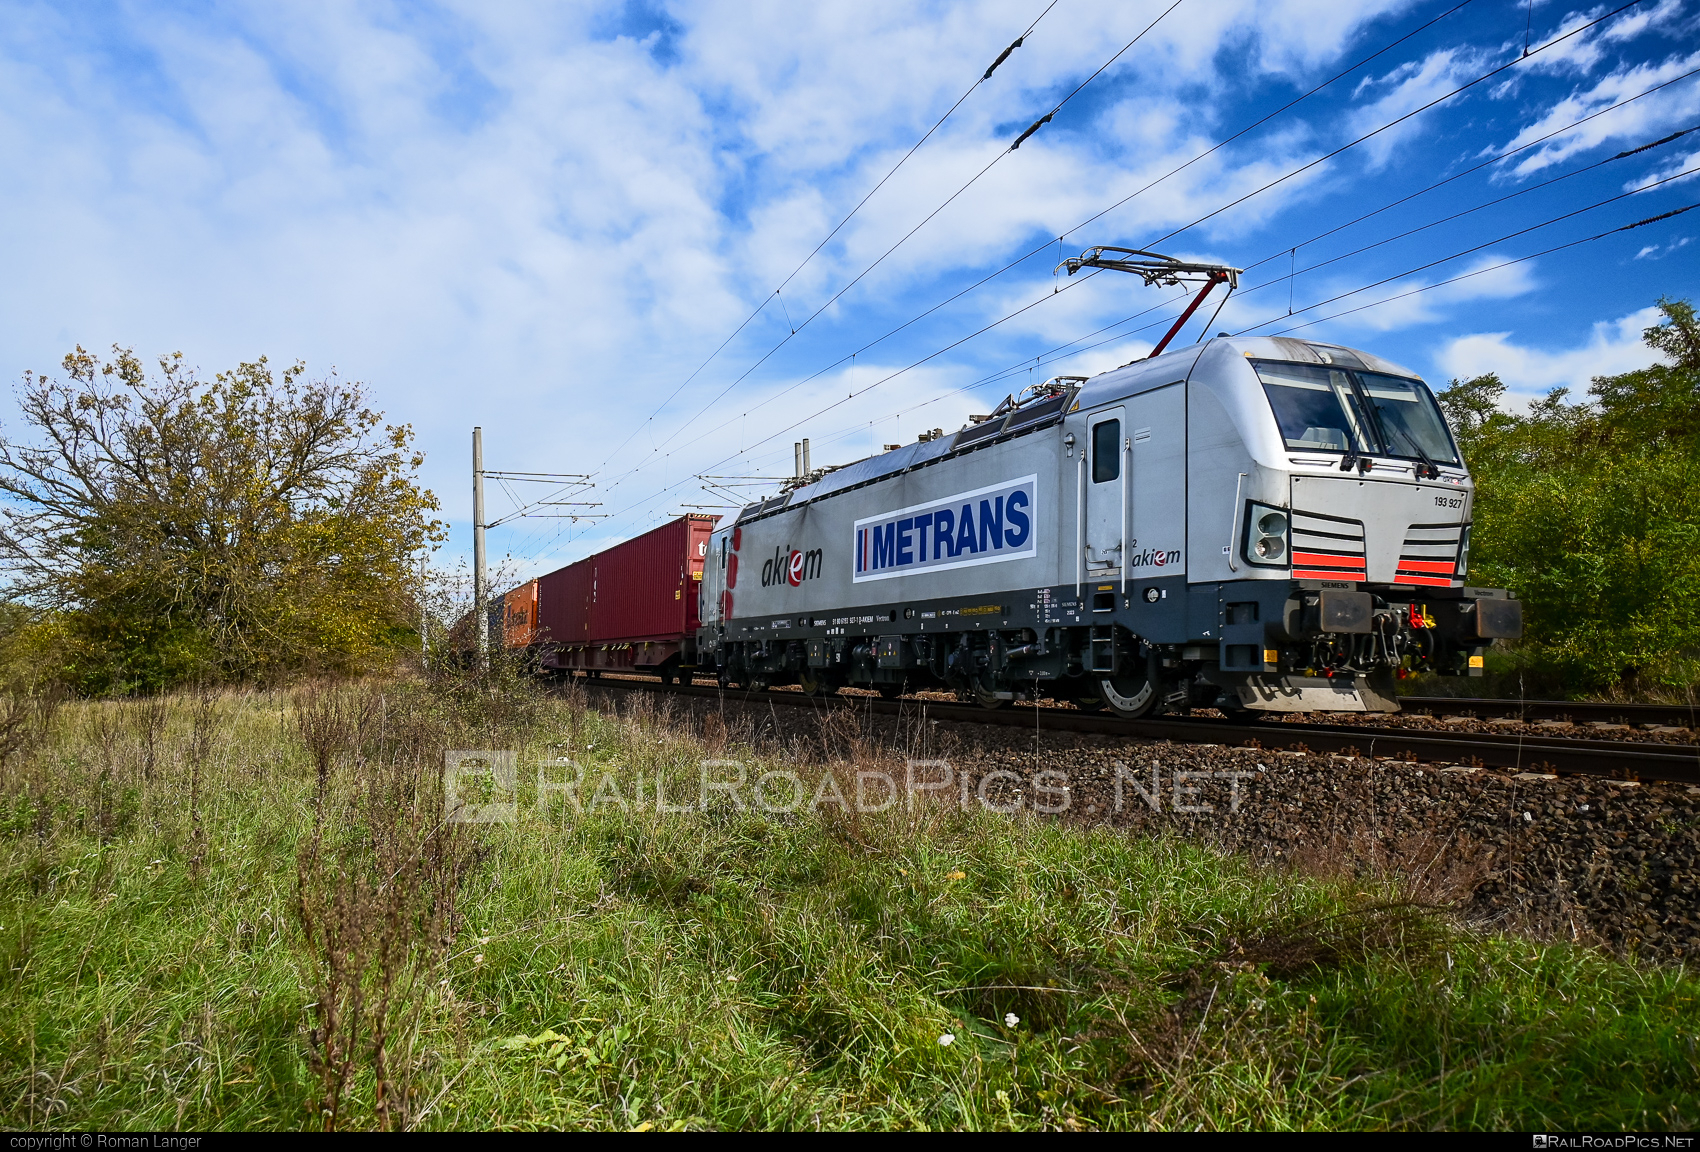 Siemens Vectron MS - 193 927 operated by METRANS Rail s.r.o. #akiem #akiemsas #container #flatwagon #hhla #metrans #metransrail #siemens #siemensVectron #siemensVectronMS #vectron #vectronMS